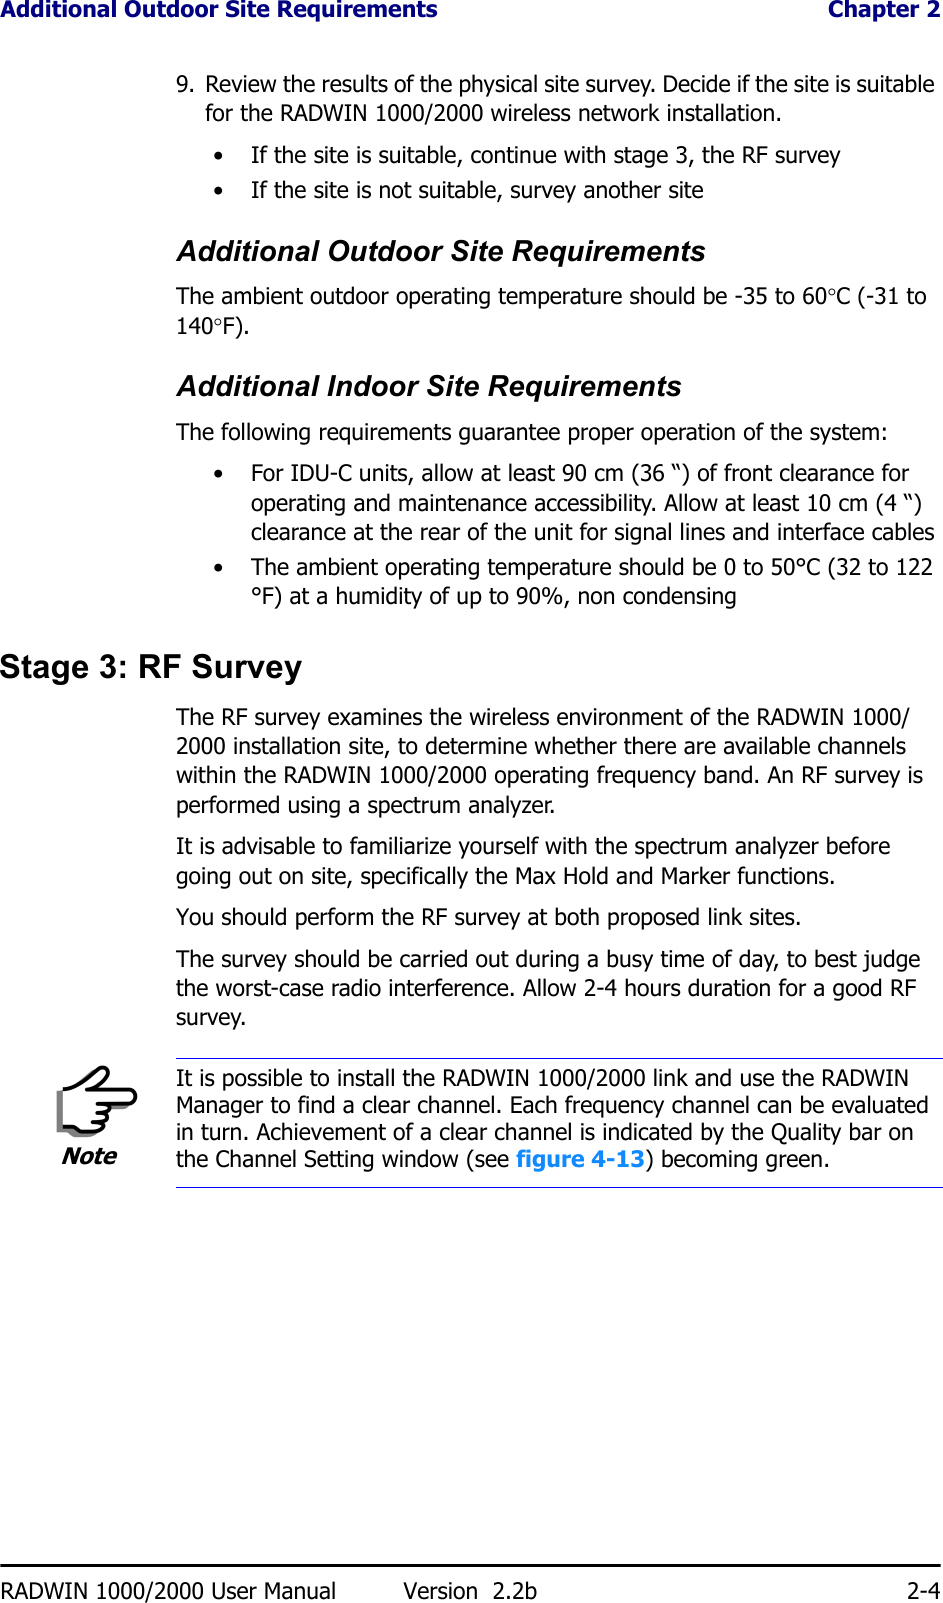 Additional Outdoor Site Requirements  Chapter 2RADWIN 1000/2000 User Manual Version  2.2b 2-49. Review the results of the physical site survey. Decide if the site is suitable for the RADWIN 1000/2000 wireless network installation.• If the site is suitable, continue with stage 3, the RF survey• If the site is not suitable, survey another siteAdditional Outdoor Site RequirementsThe ambient outdoor operating temperature should be -35 to 60°C (-31 to 140°F).Additional Indoor Site RequirementsThe following requirements guarantee proper operation of the system:• For IDU-C units, allow at least 90 cm (36 “) of front clearance for operating and maintenance accessibility. Allow at least 10 cm (4 “) clearance at the rear of the unit for signal lines and interface cables• The ambient operating temperature should be 0 to 50°C (32 to 122 °F) at a humidity of up to 90%, non condensingStage 3: RF SurveyThe RF survey examines the wireless environment of the RADWIN 1000/2000 installation site, to determine whether there are available channels within the RADWIN 1000/2000 operating frequency band. An RF survey is performed using a spectrum analyzer.It is advisable to familiarize yourself with the spectrum analyzer before going out on site, specifically the Max Hold and Marker functions.You should perform the RF survey at both proposed link sites.The survey should be carried out during a busy time of day, to best judge the worst-case radio interference. Allow 2-4 hours duration for a good RF survey.NoteIt is possible to install the RADWIN 1000/2000 link and use the RADWIN Manager to find a clear channel. Each frequency channel can be evaluated in turn. Achievement of a clear channel is indicated by the Quality bar on the Channel Setting window (see figure 4-13) becoming green.